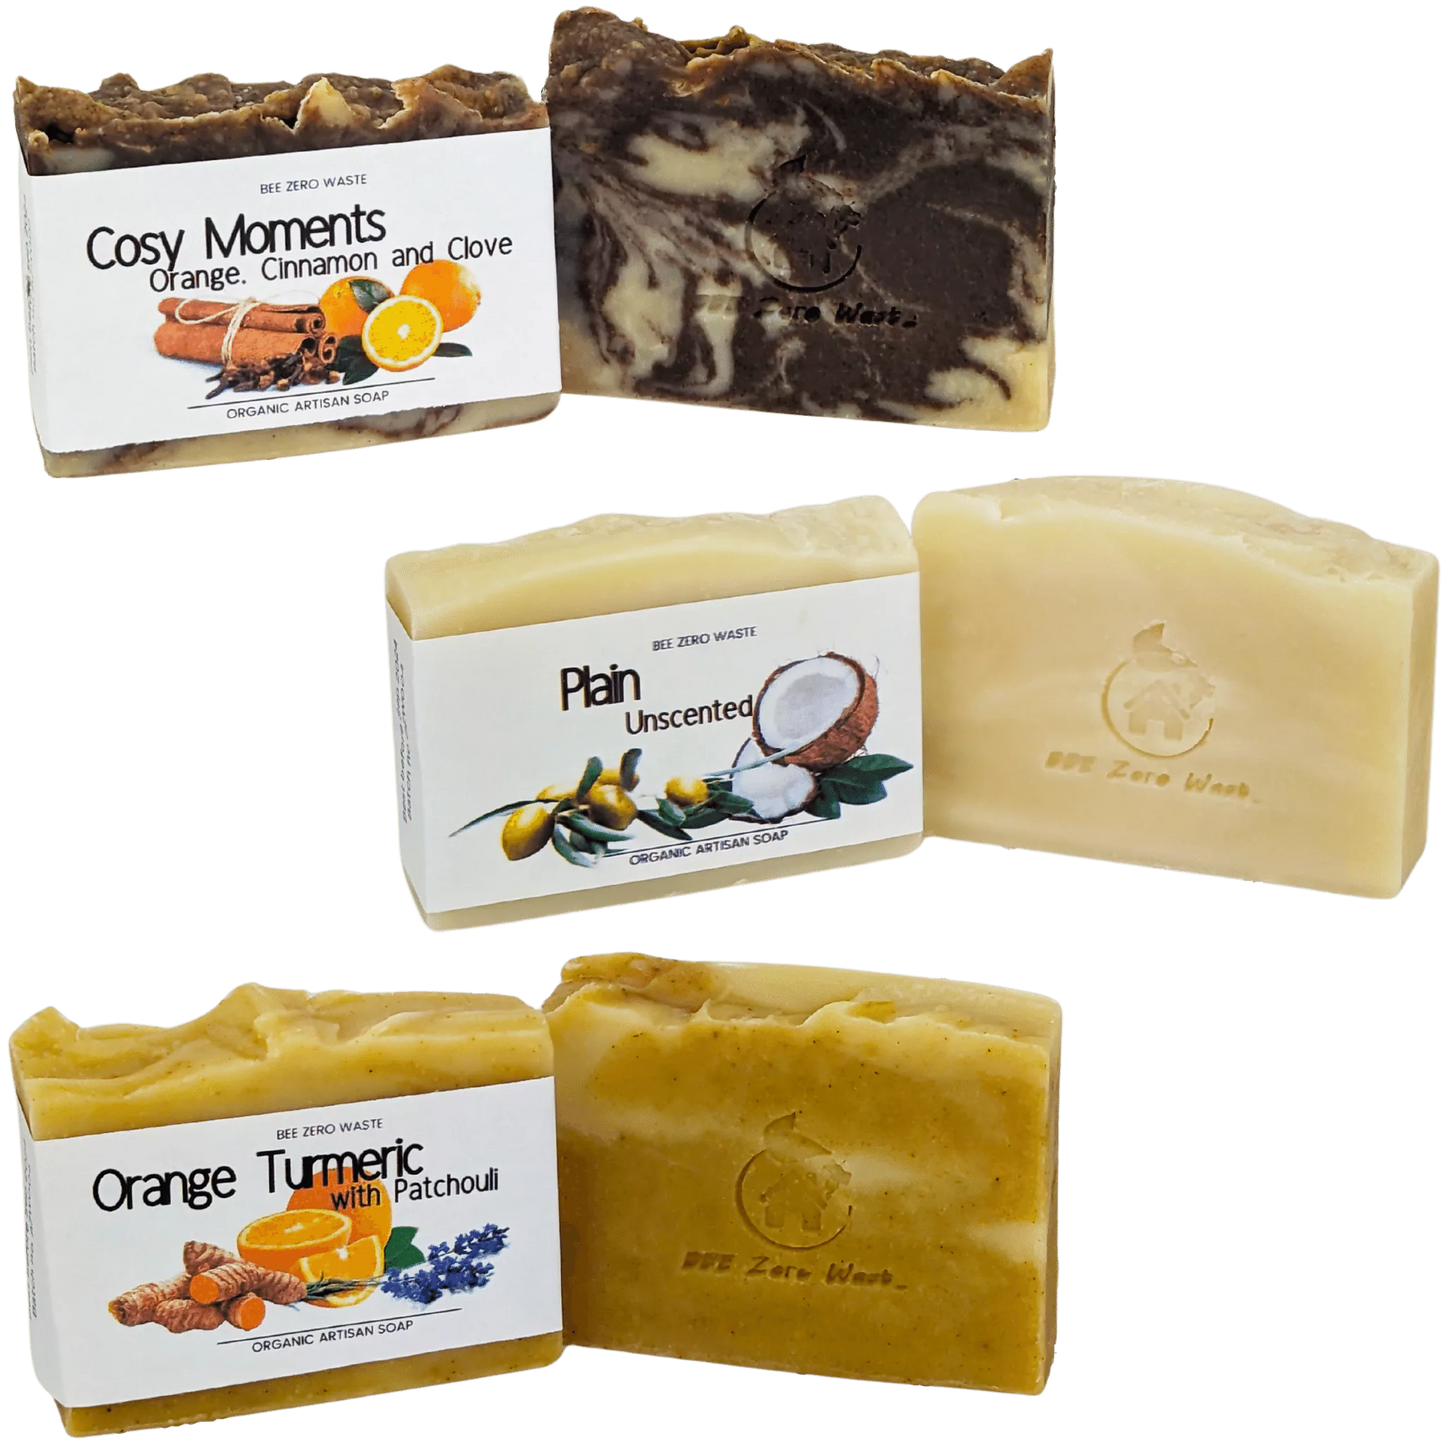 Sustainable Bathing Experience with Floral, Herbal, Citrus Natural Soap Bars - Palm Oil-Free.